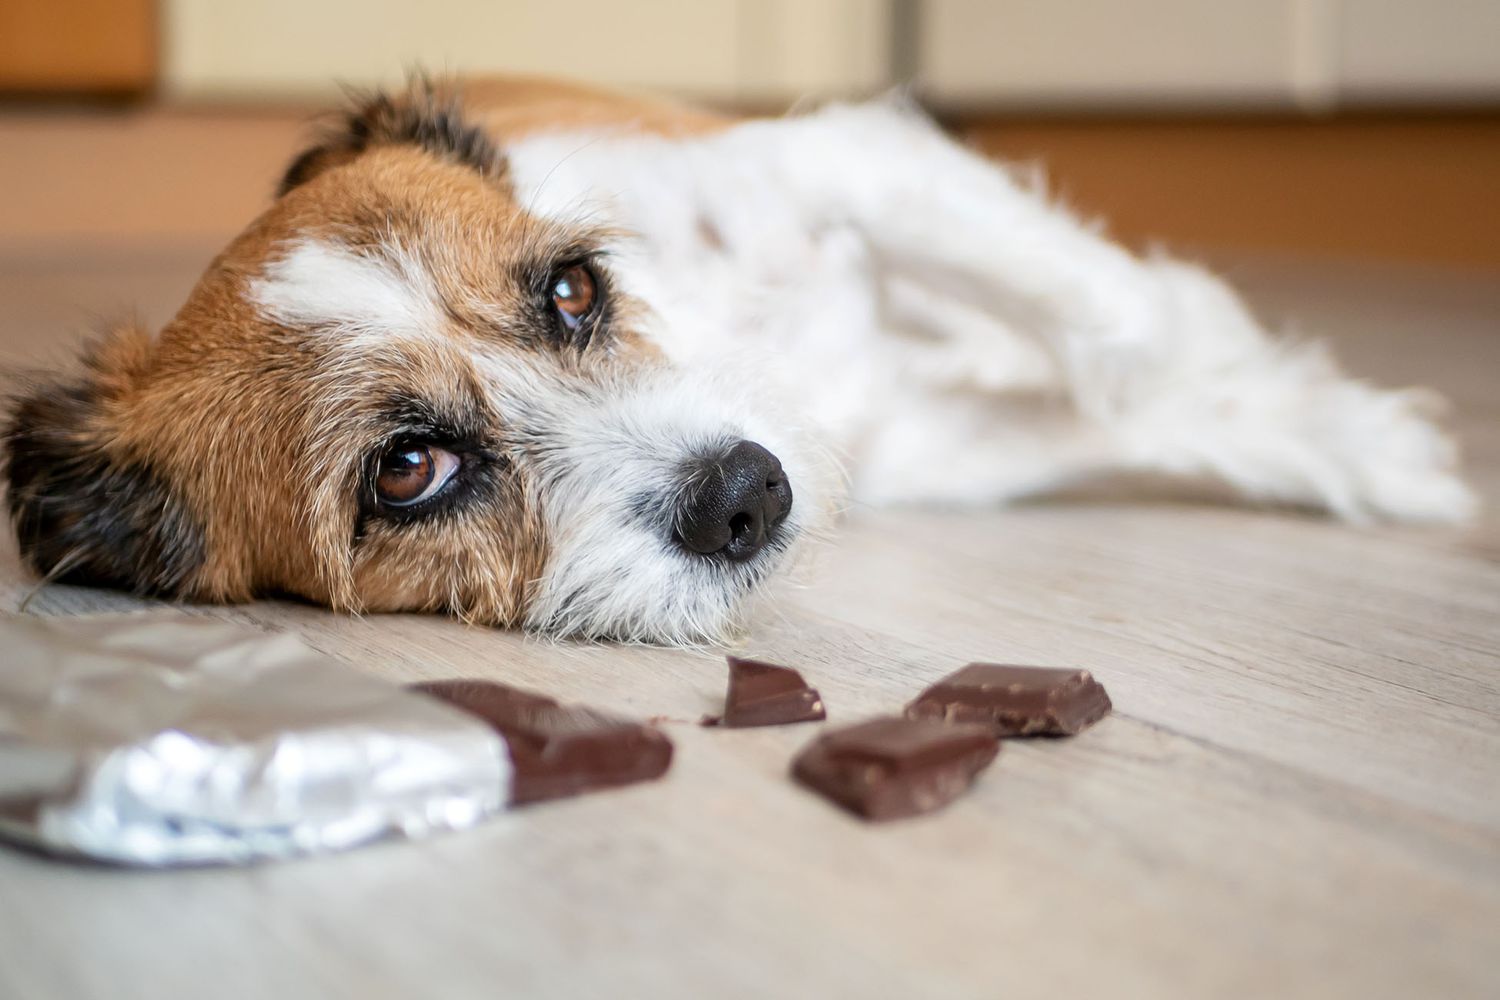 dog lying on floor looking sick with chocolate nearby